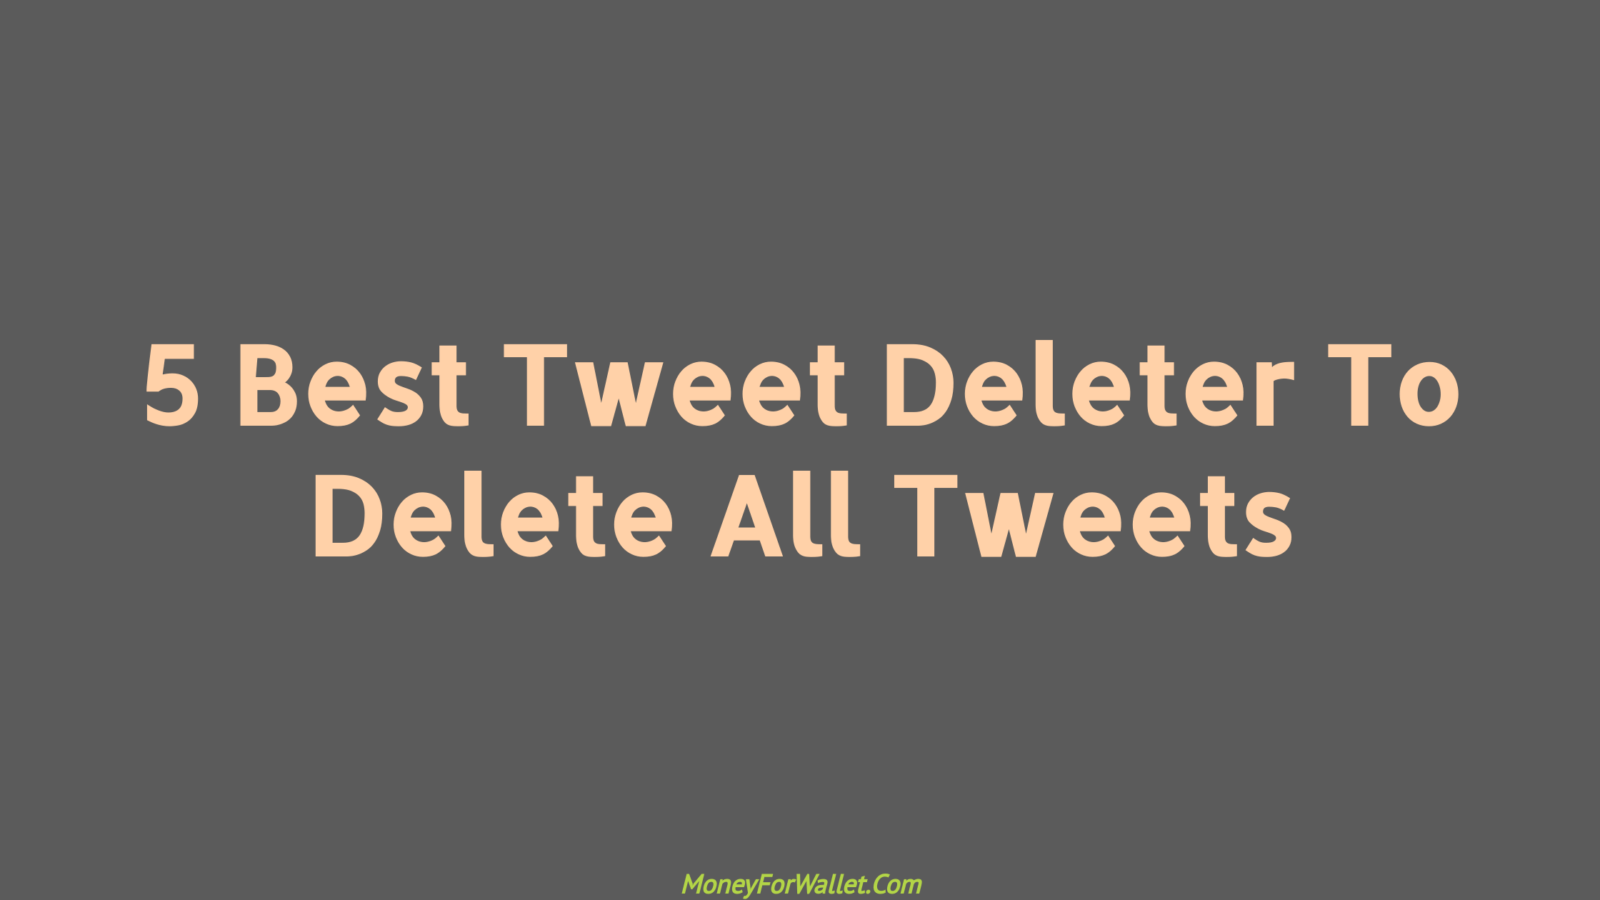 10 Best Tweet Deleter Delete Old Tweets And Likes With Free And Paid Tools